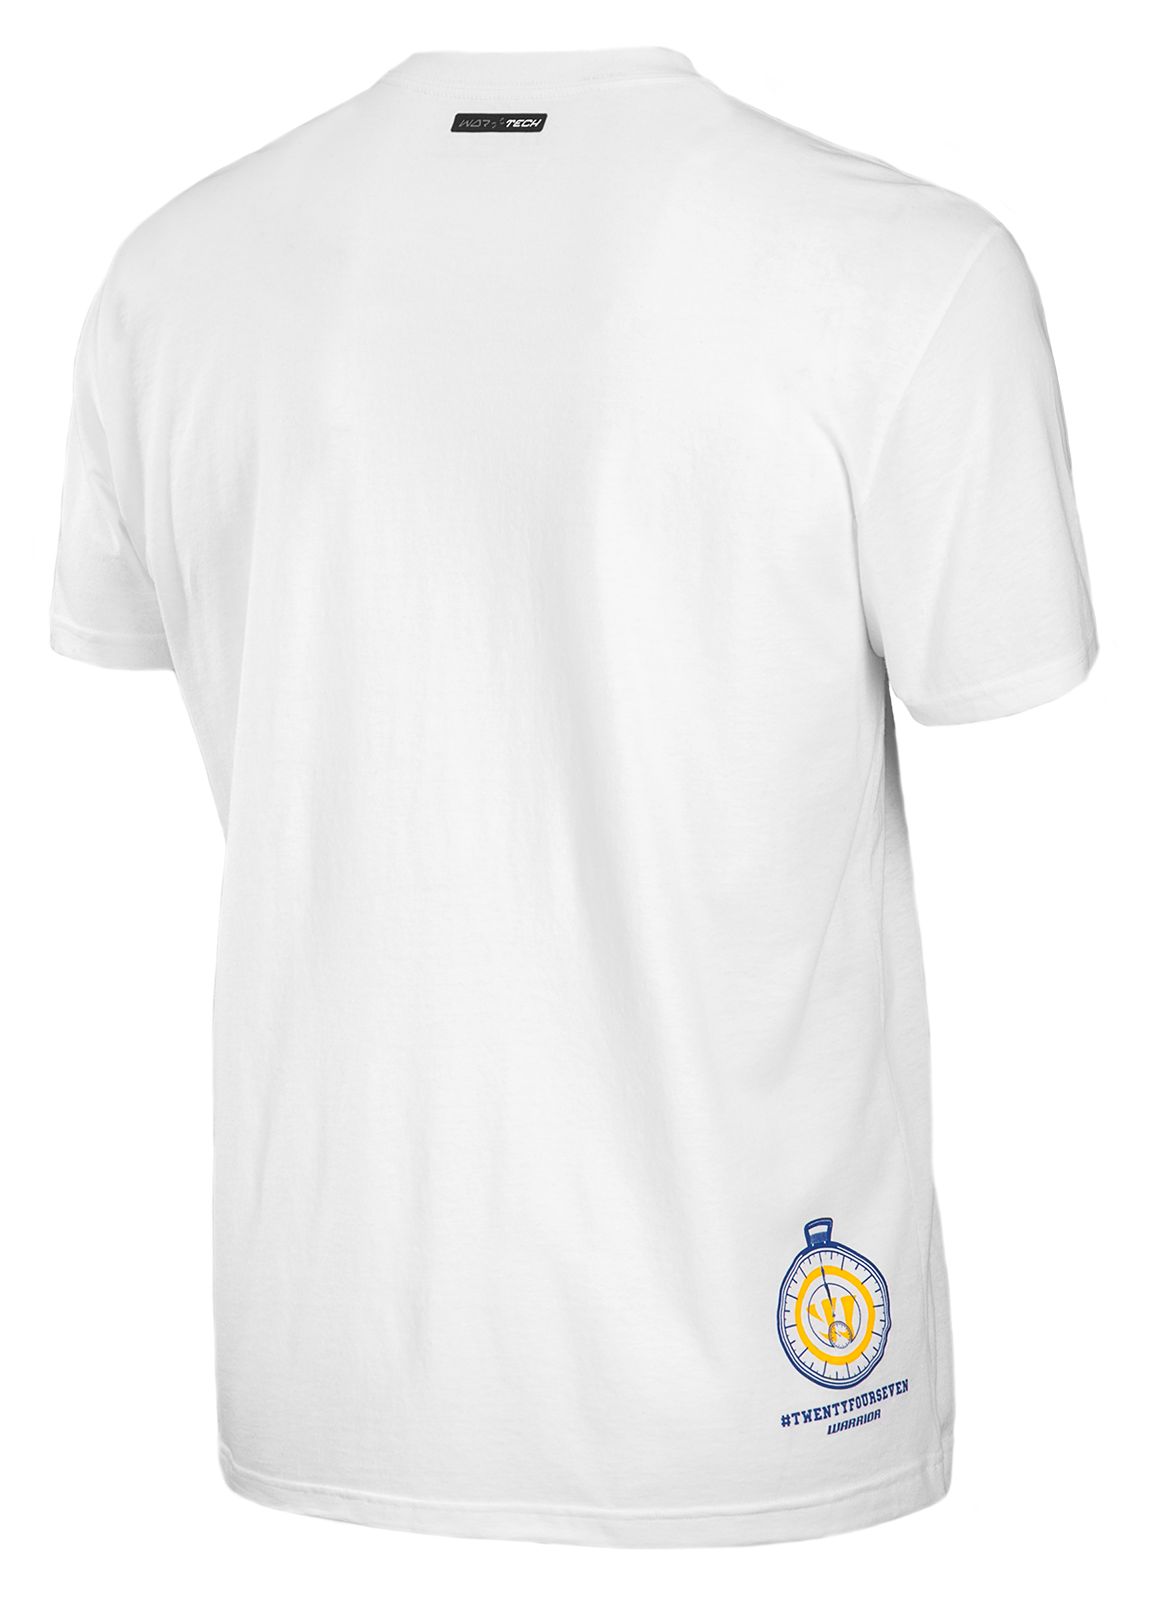 Showtime 50/50 Tee, White image number 0